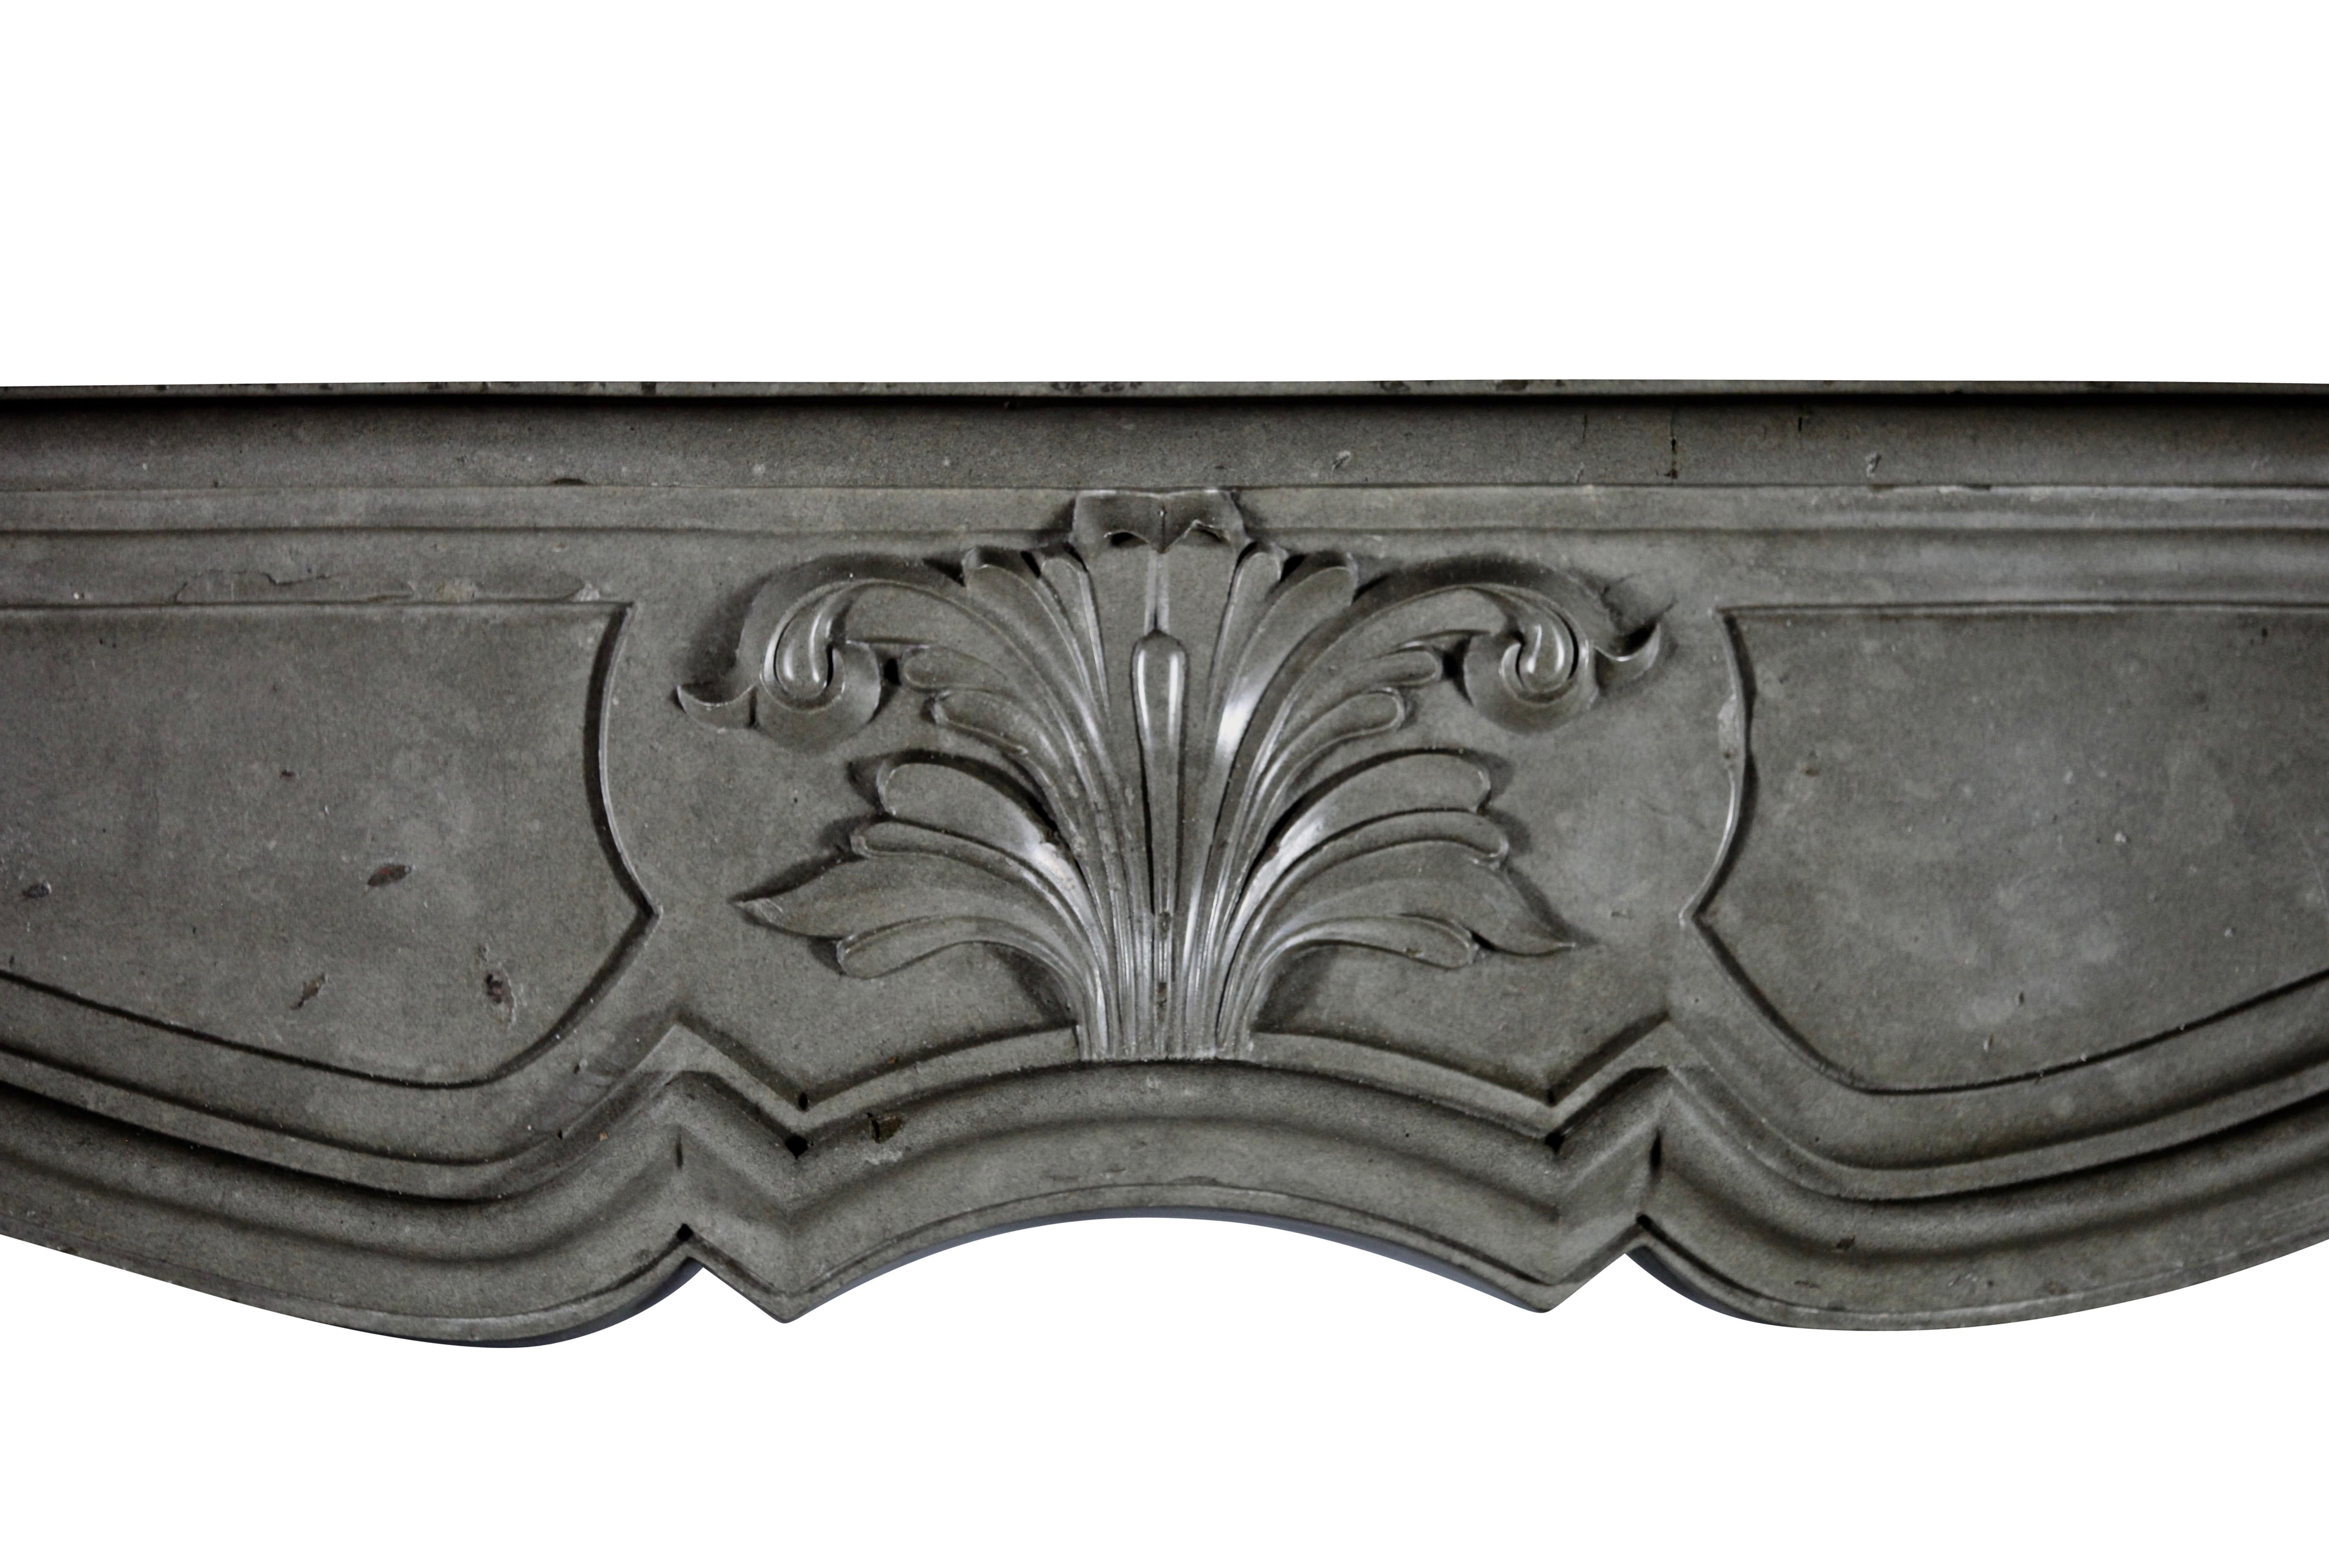 This is a original Louis XIV period exquisite French antique fireplace mantle in a bicolor marble hard stone. The images says it all; High quality for luxury living.
A one of a kind piece. Will be the eyecatcher of a room. Combinable from Classic